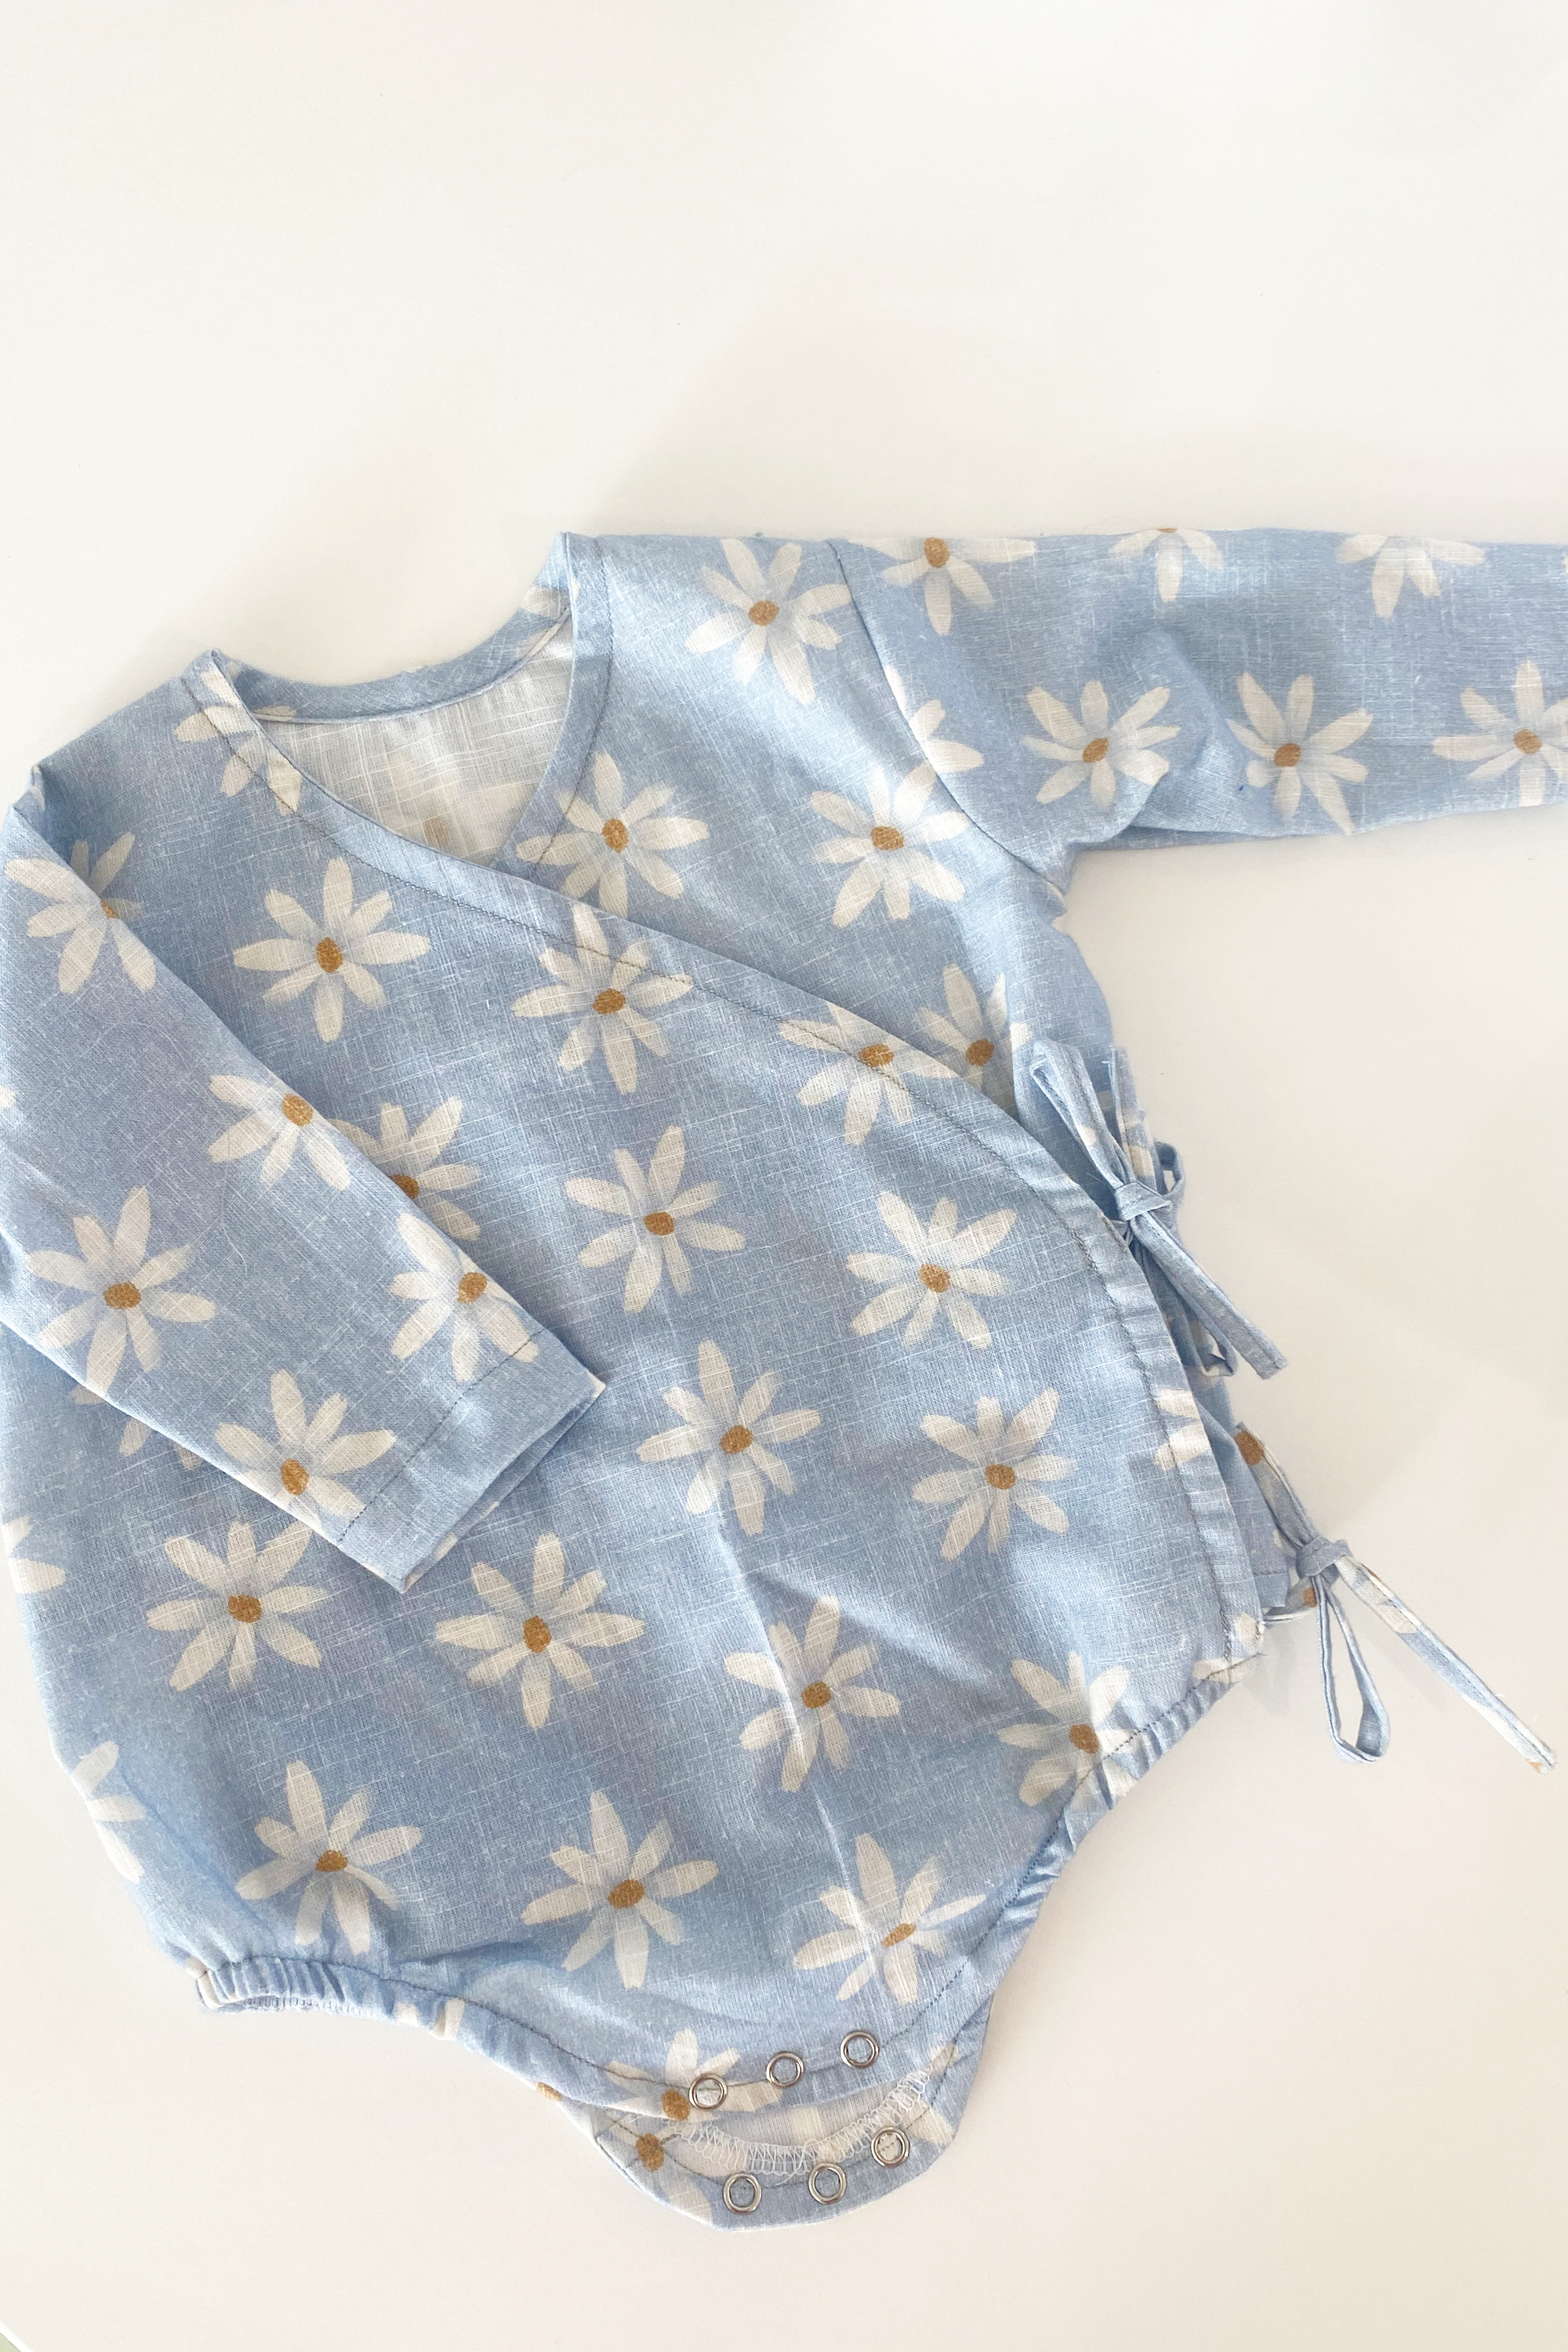 A photo of a finished Baby Bellbird Romper and Top.